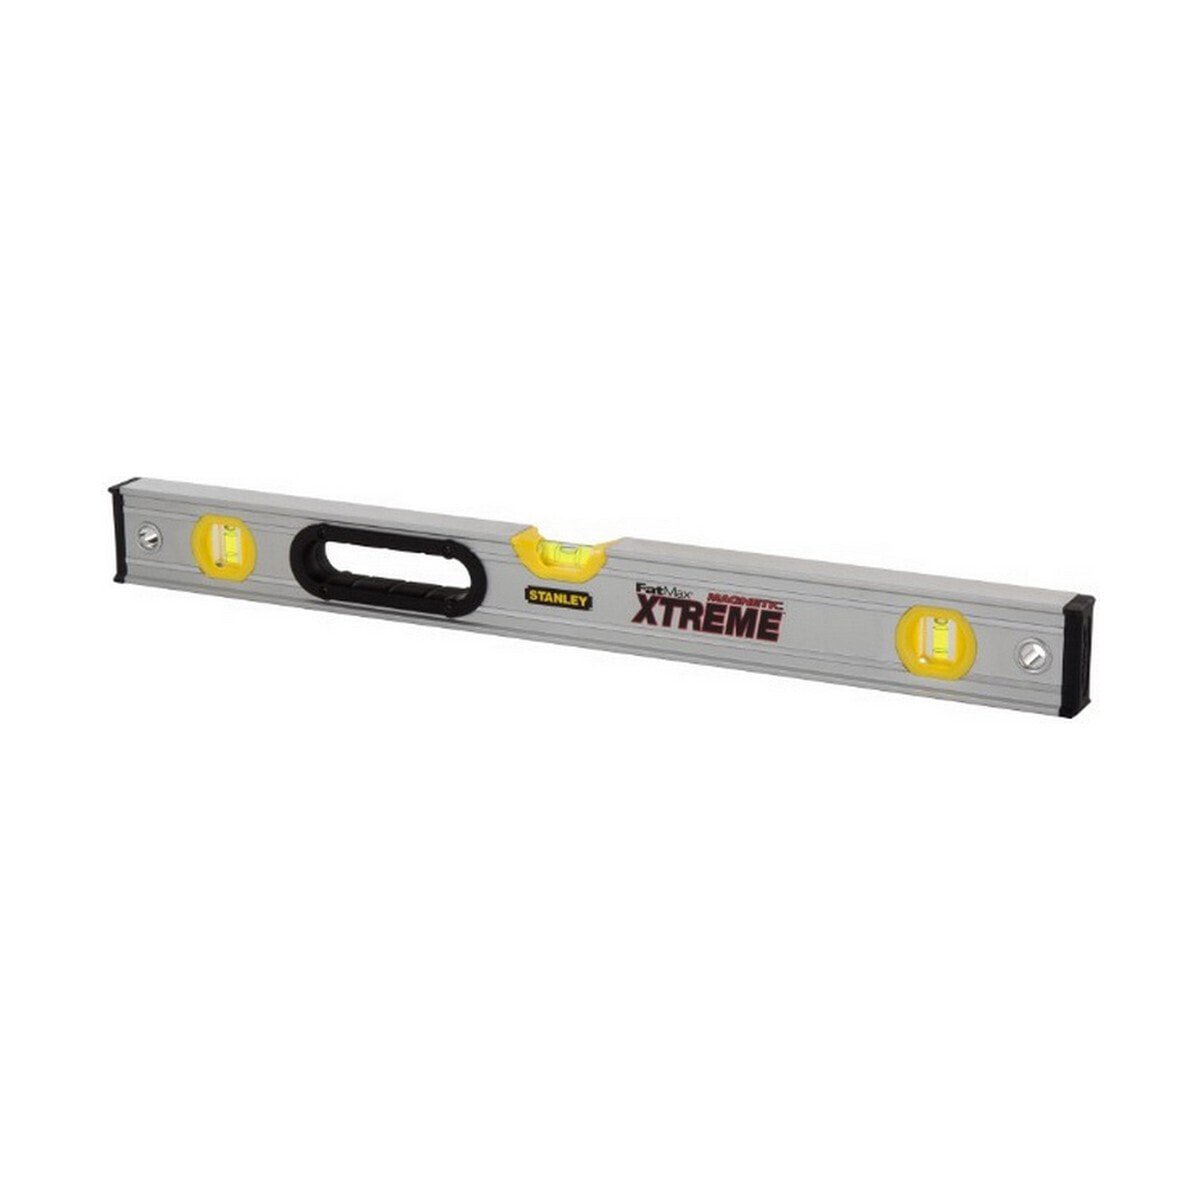 Level Stanley atmax xtreme 0-43-637 Magnetic Natural rubber